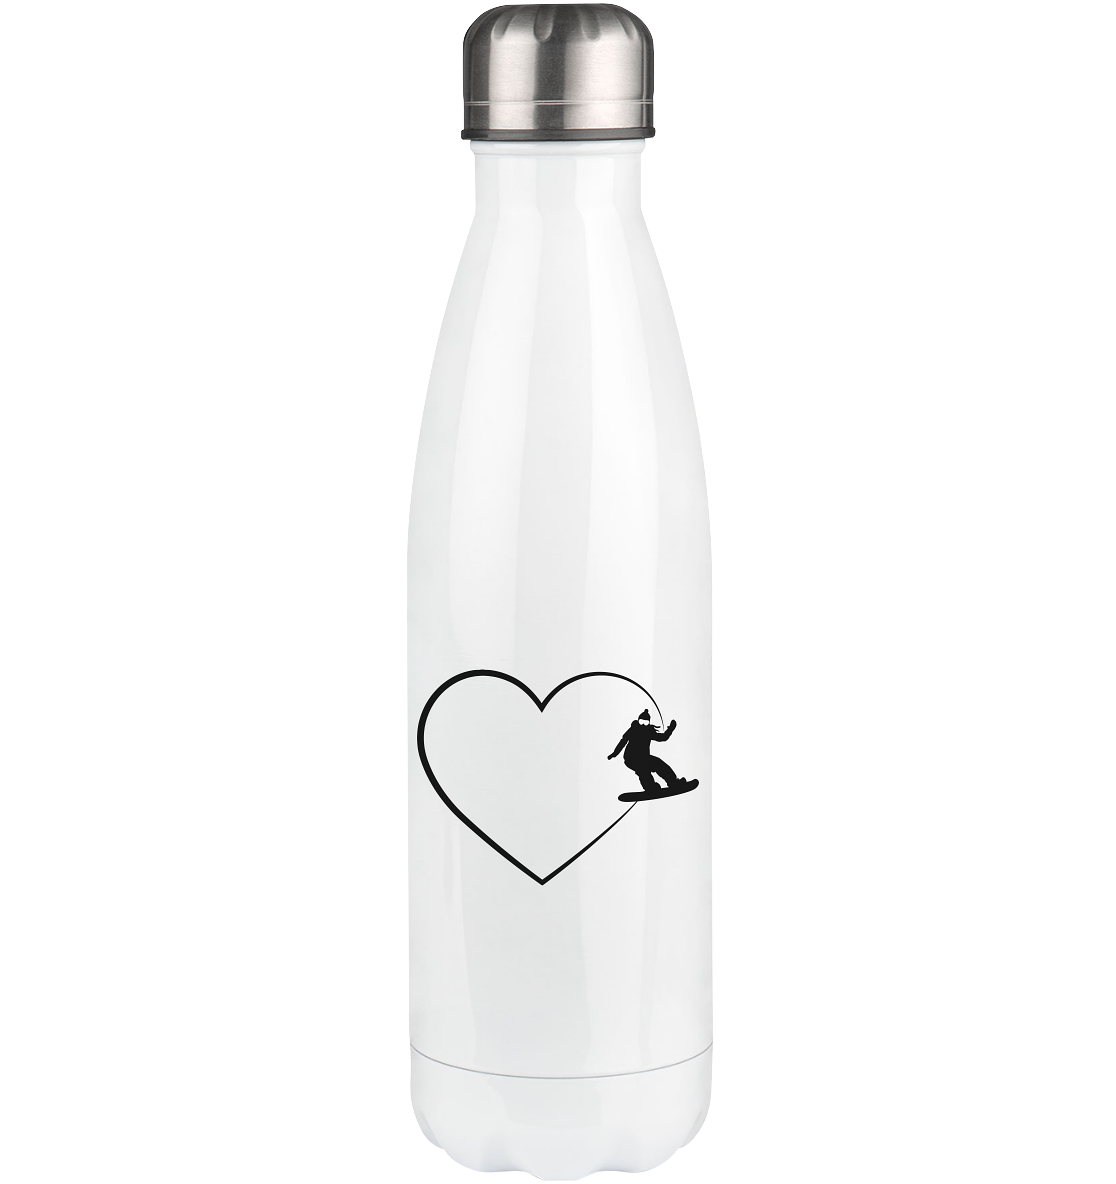 Heart 2 and Snowboarding - Edelstahl Thermosflasche snowboarden 500ml